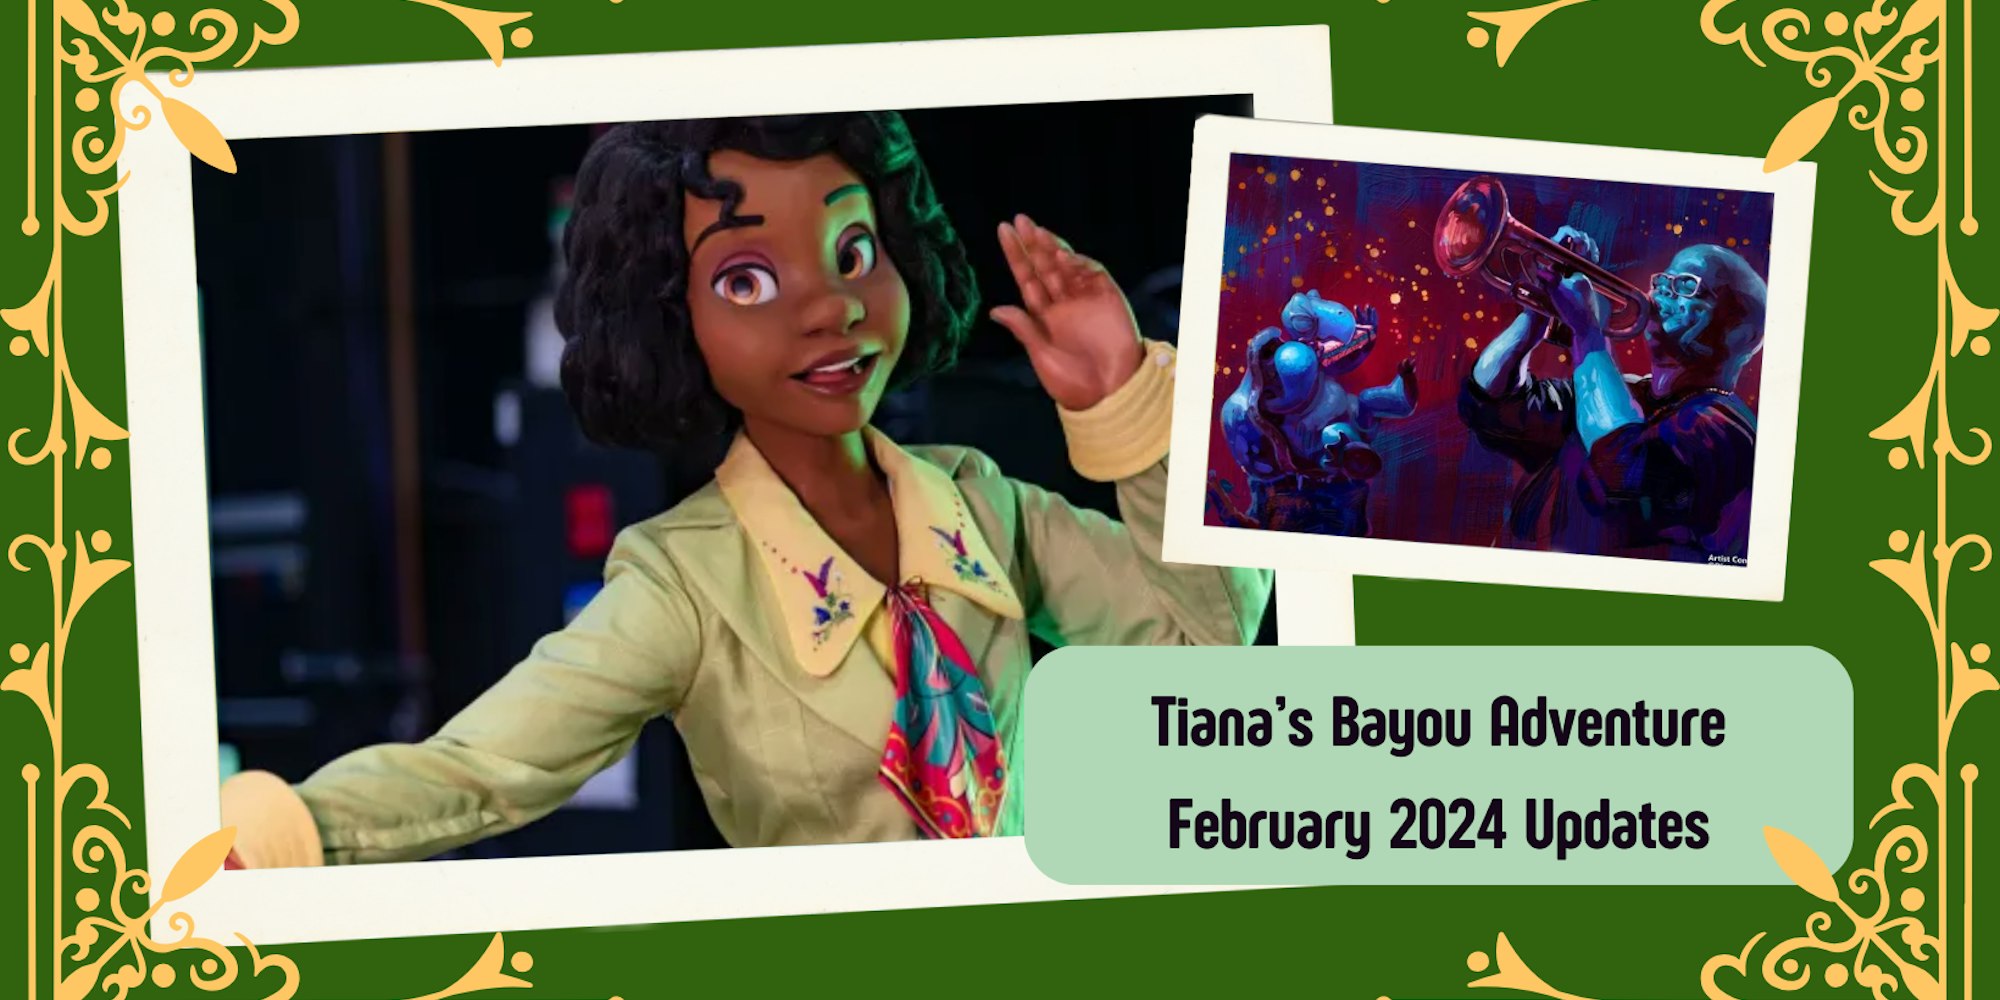 Cover Image for Tiana's Bayou Adventure News: Exciting Updates for 2024